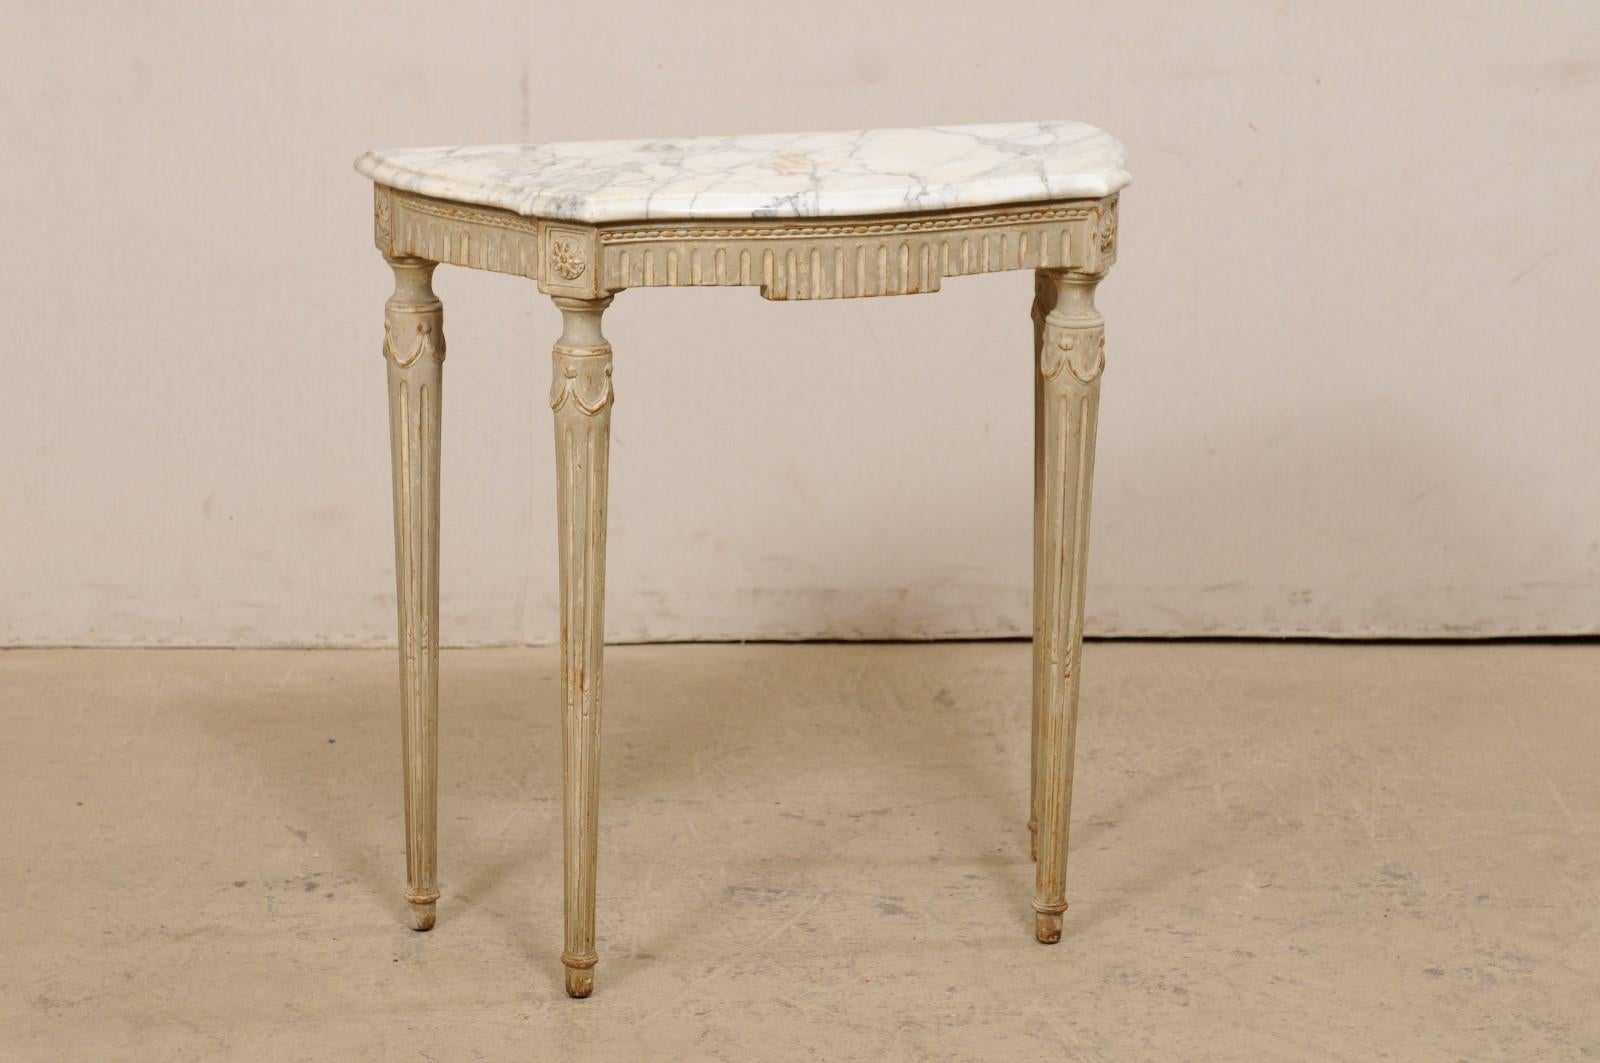 A French small-sized carved-wood console table, with it's original marble top, from the late 19th to early 20th century. This antique table from France retains it's original white marble top with gray veining, which is flat along the backside (so